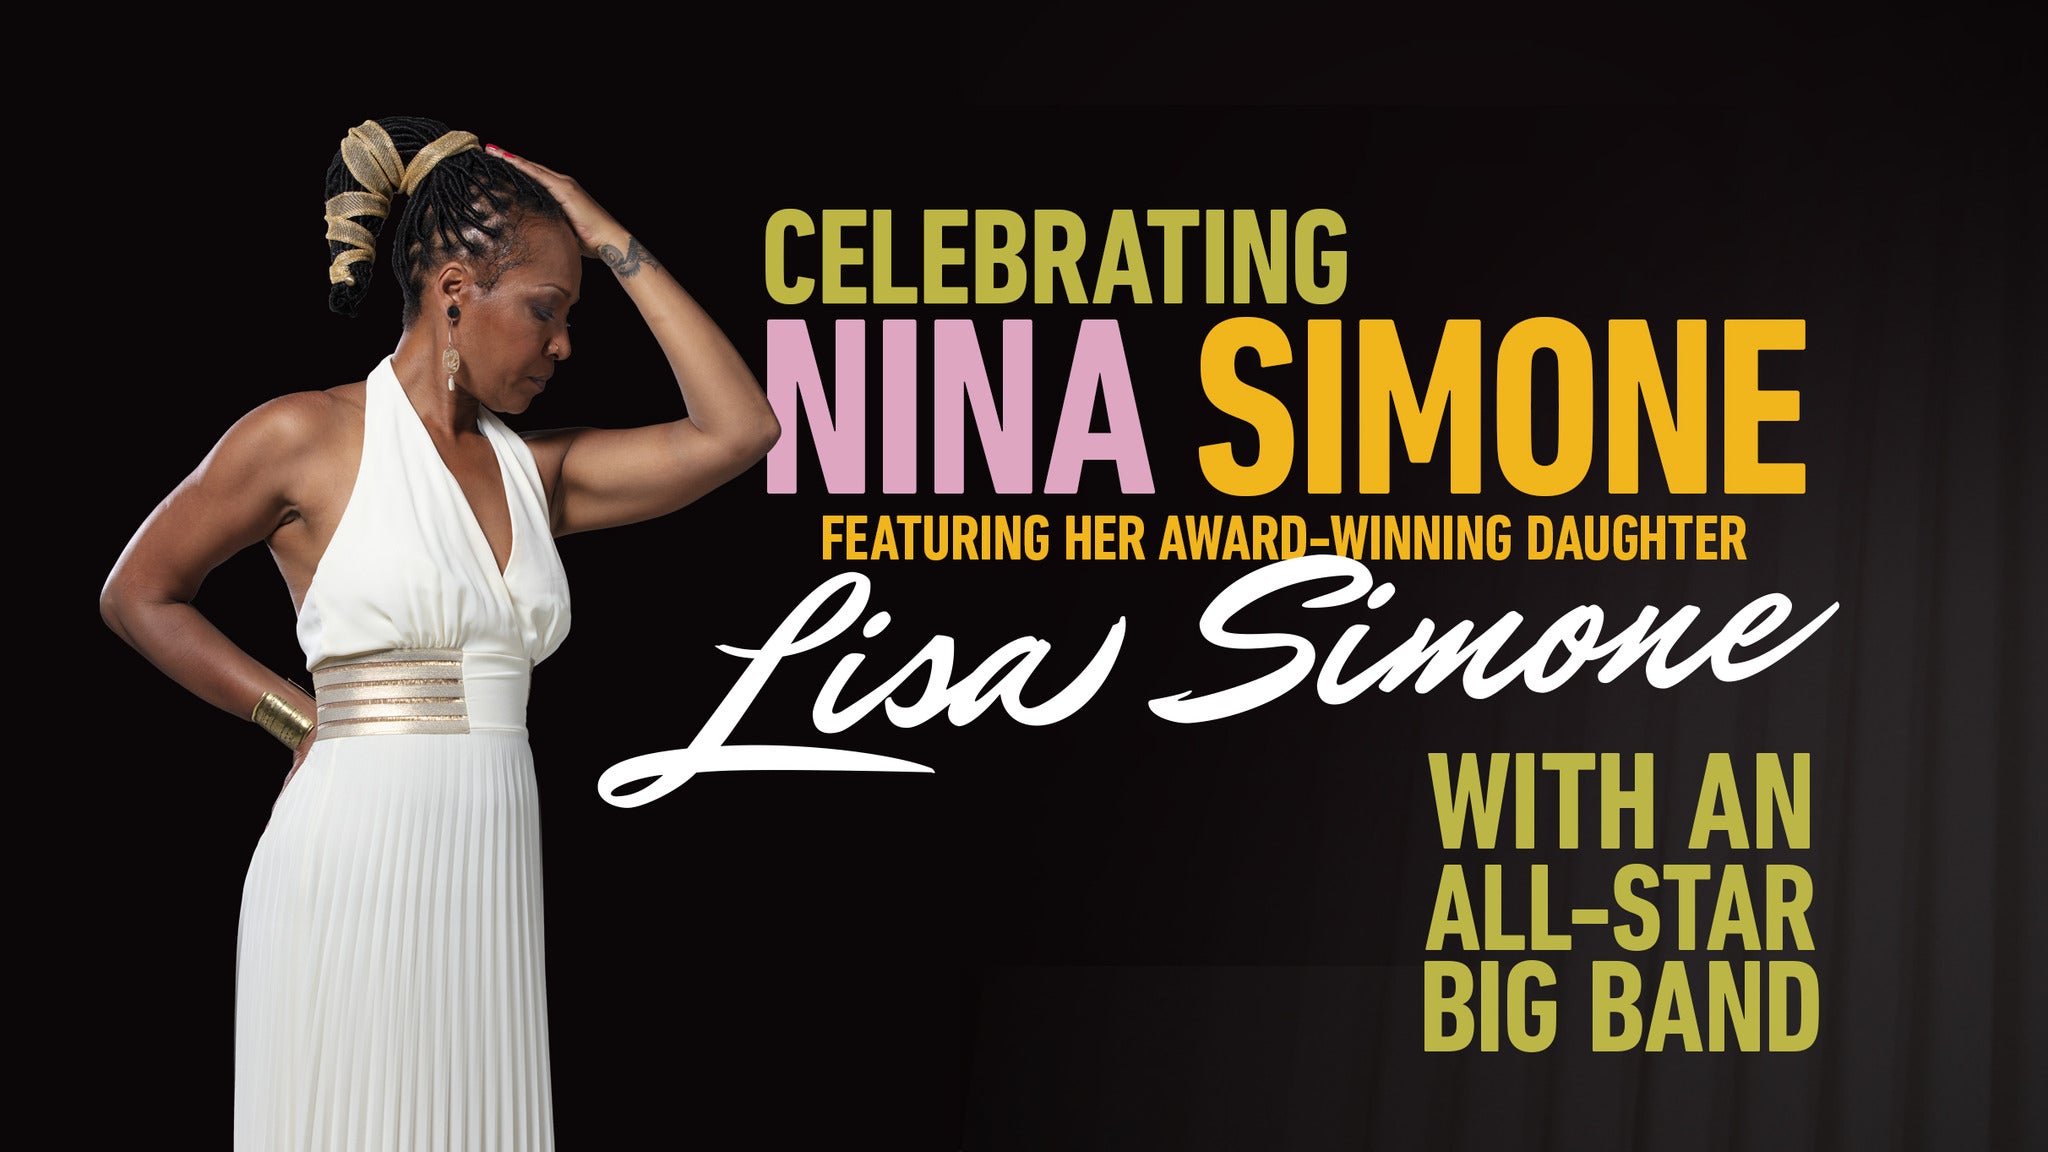 Image used with permission from Ticketmaster | Celebrating Nina Simone - Featuring Award Winning Daughter Lisa Simone tickets